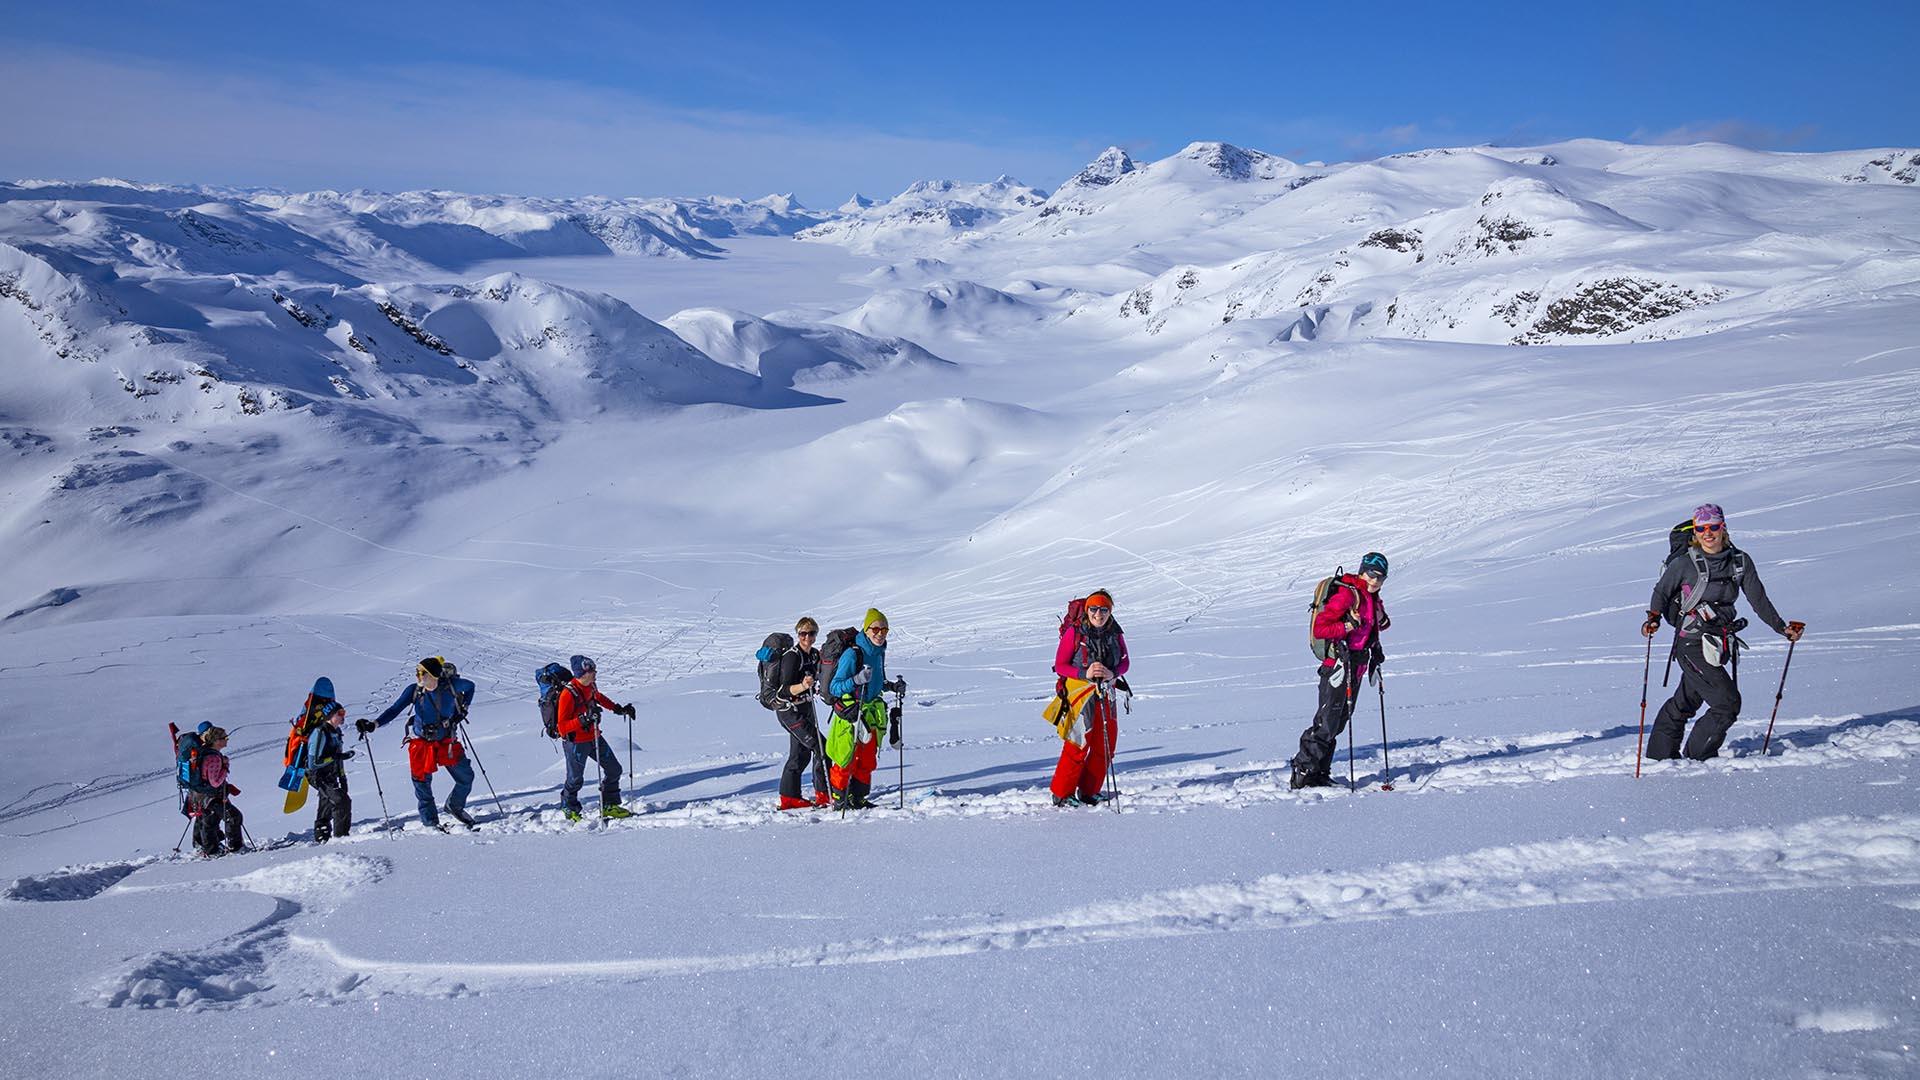 Group of 9 persons on their way up a mountain on randonee skis. Snow covered mountains in the background.